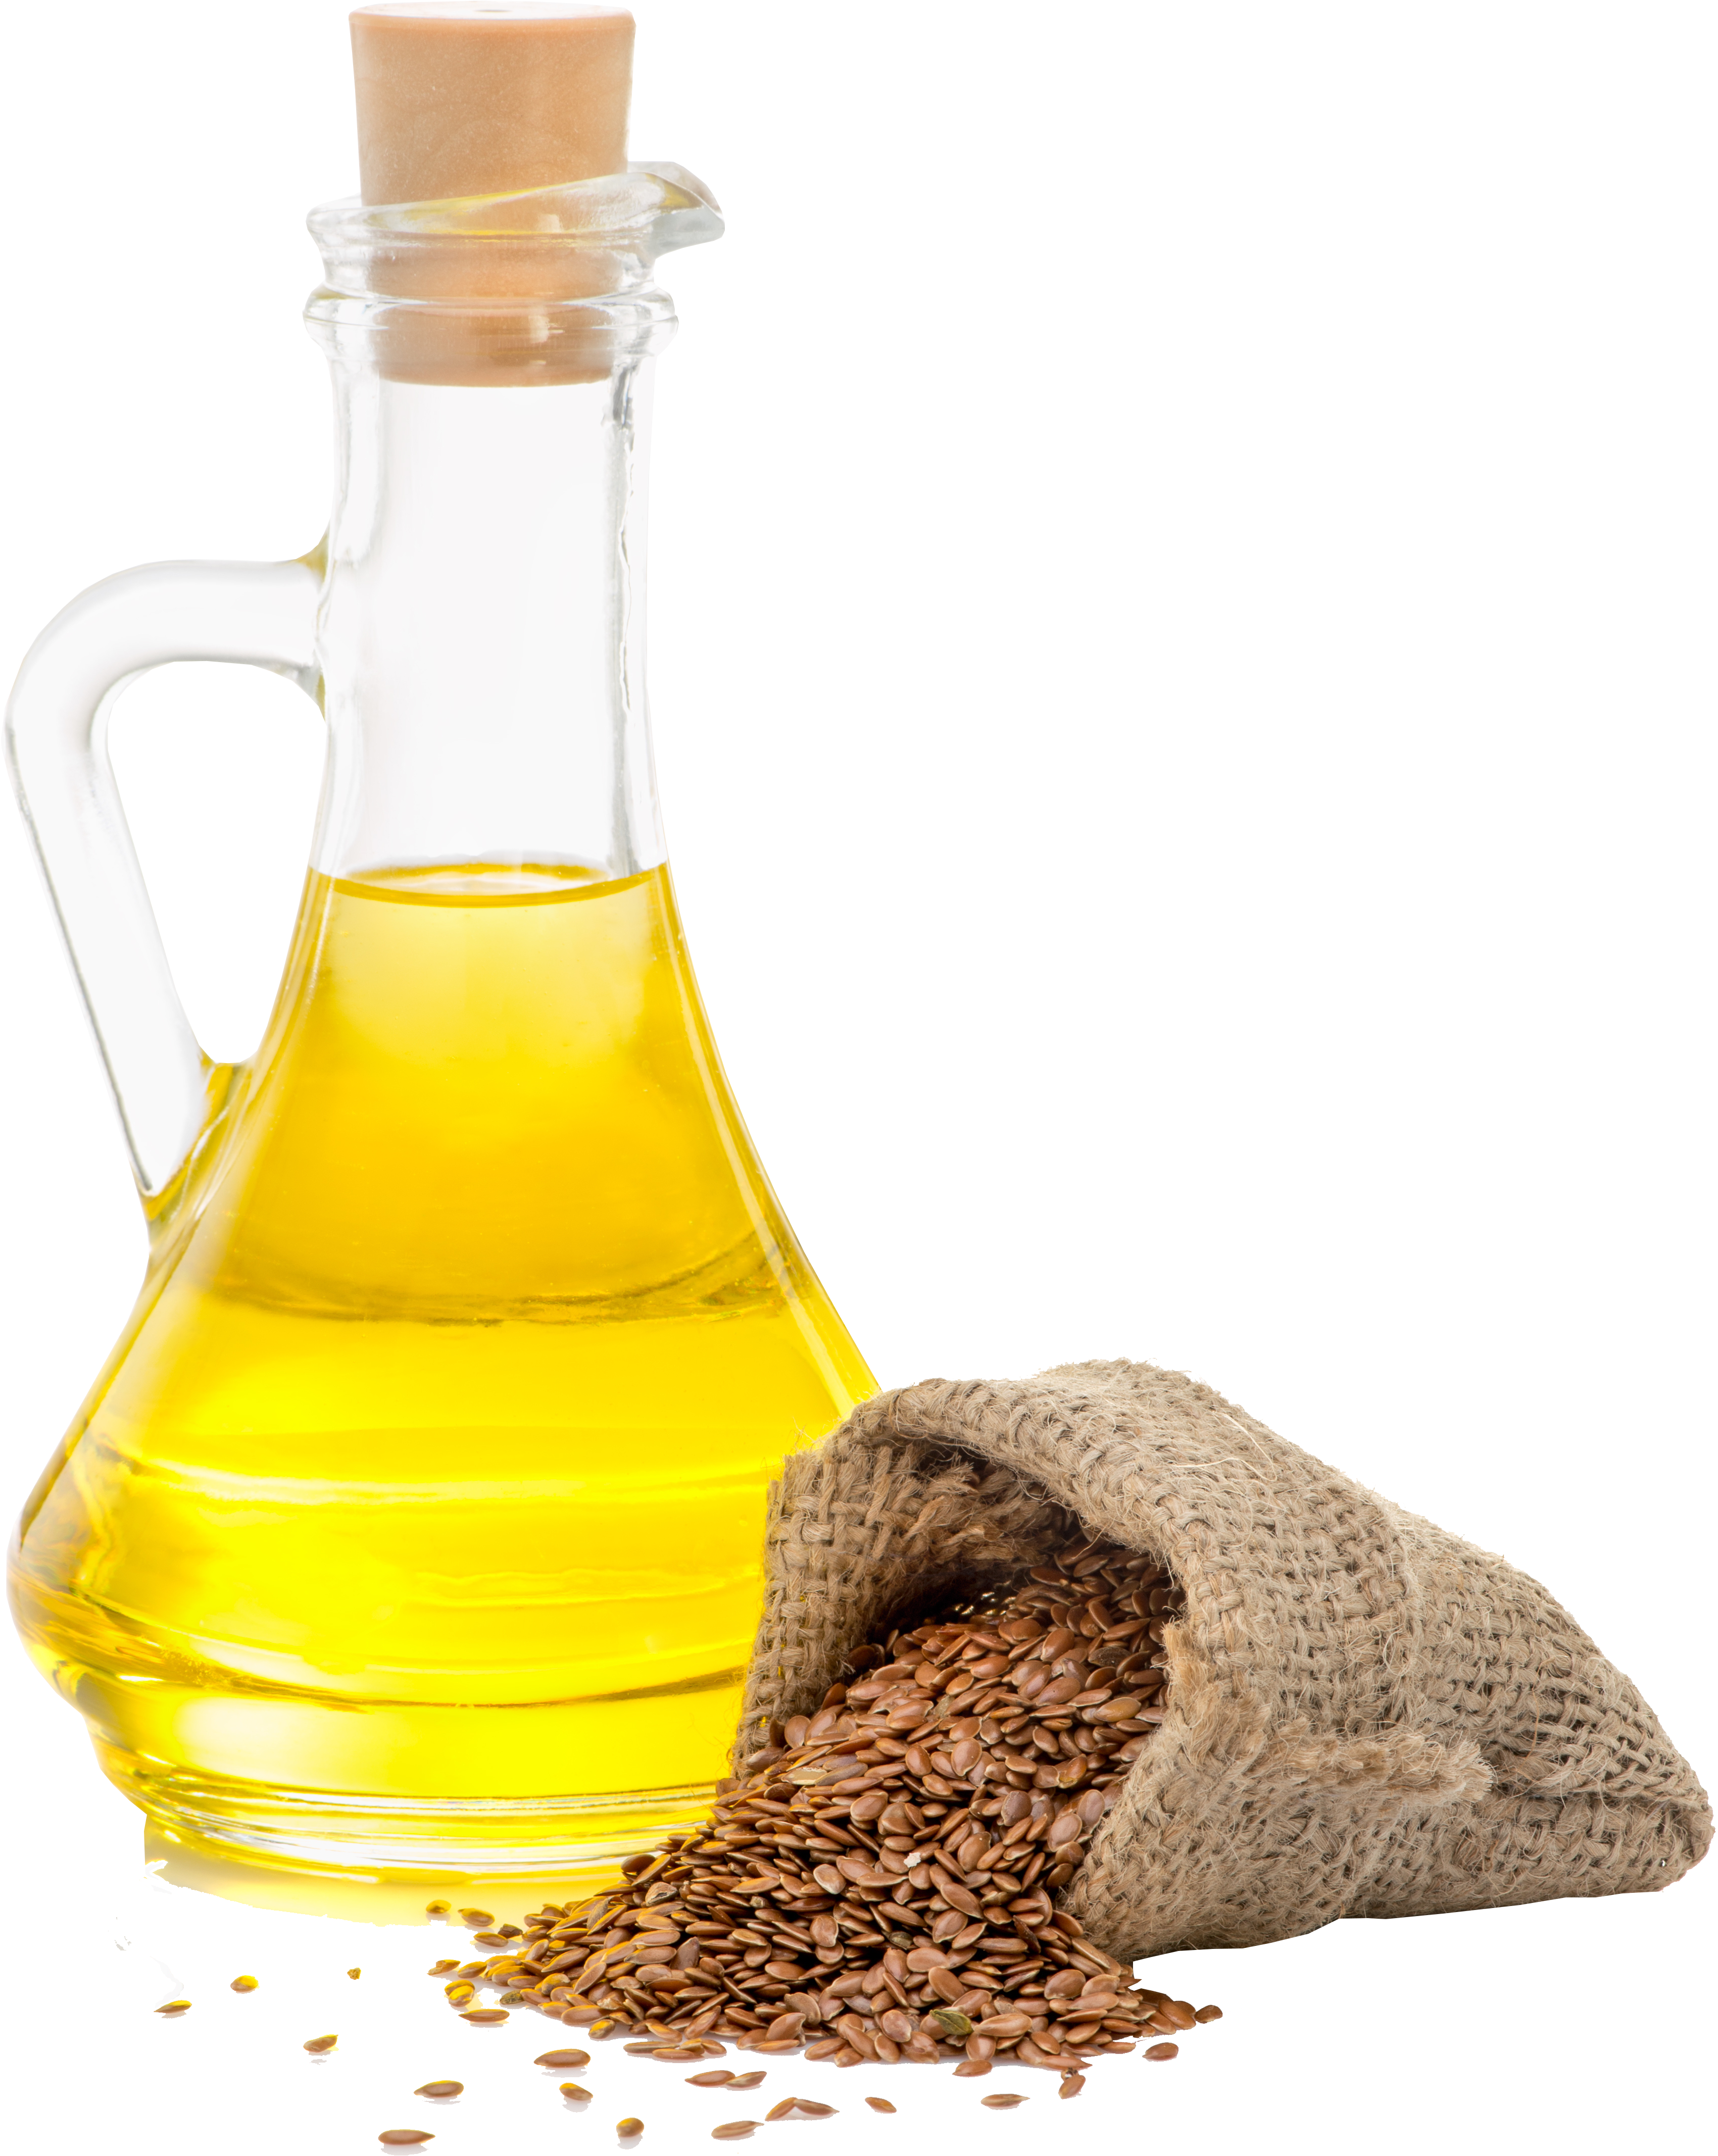 Flaxseed Oil - Linseed Oil (4262x4762)